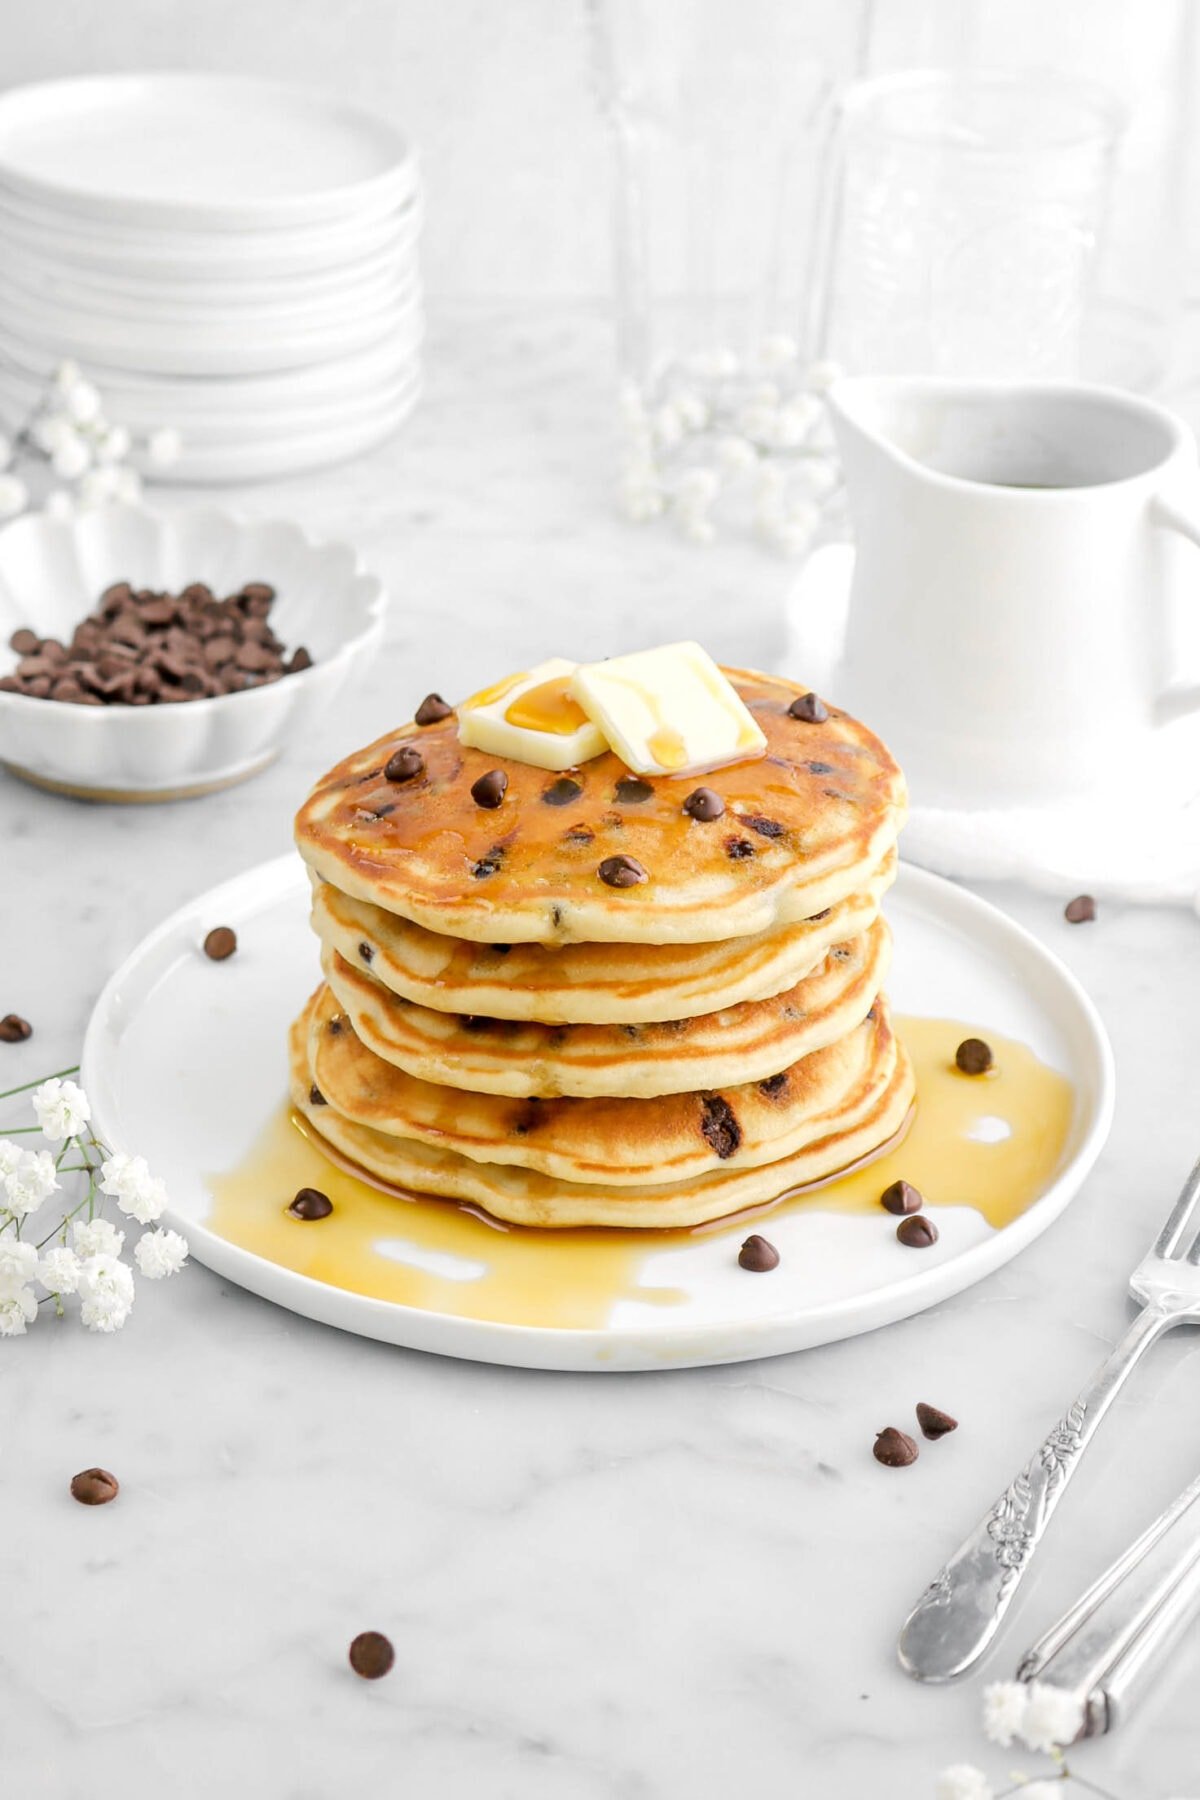 five stacked chocolate chip pancakes with butter and maple syrup on top of the top pancake, with bowl of chocolate chips behind, a ceramic creamer, and flowers behind.